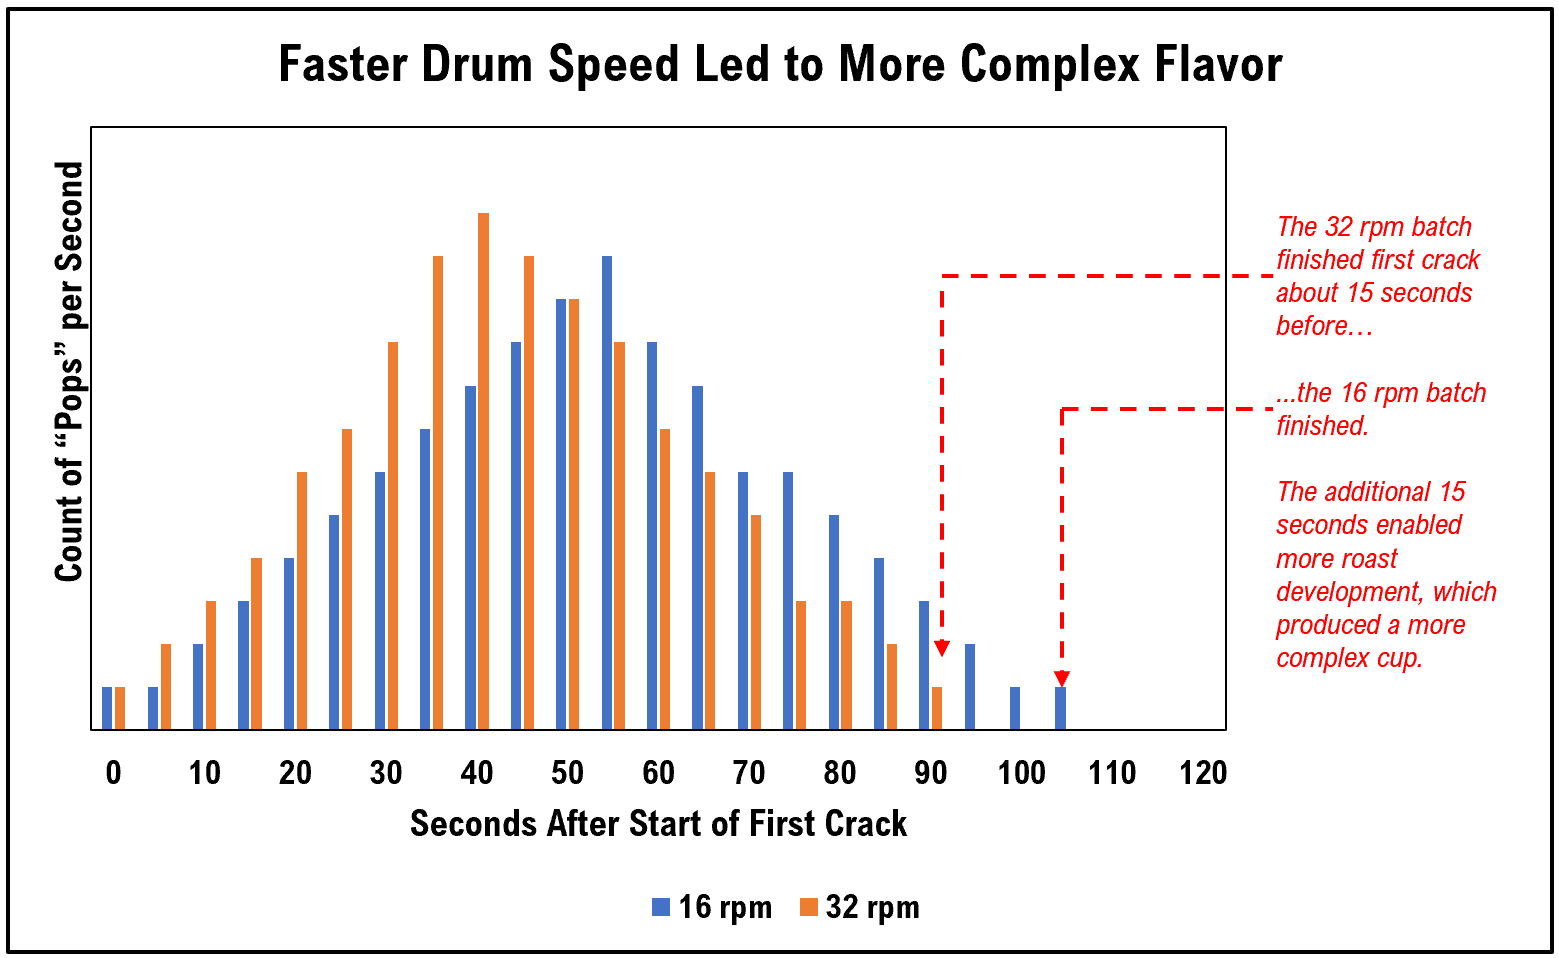 faster drum speed led to more complex cup